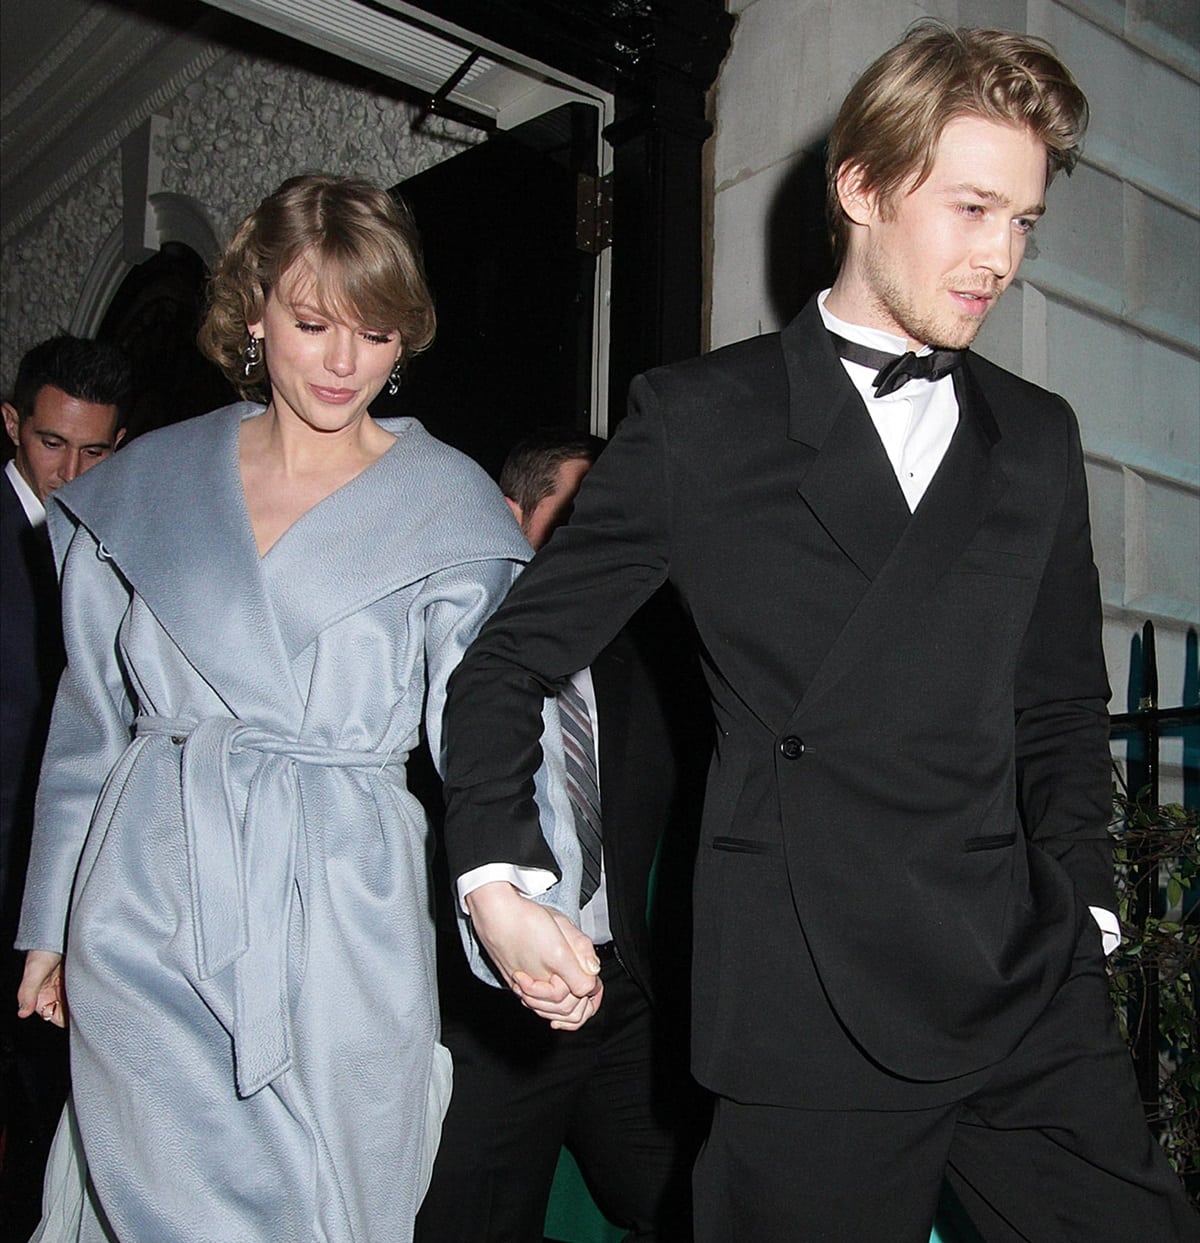 In their relationship that began in 2016 and continued into 2023, Taylor Swift, standing at 5 feet 9¼ inches (175.9 cm), shared her life with Joe Alwyn, who stands taller at 6 feet 1 inch (185.4 cm)